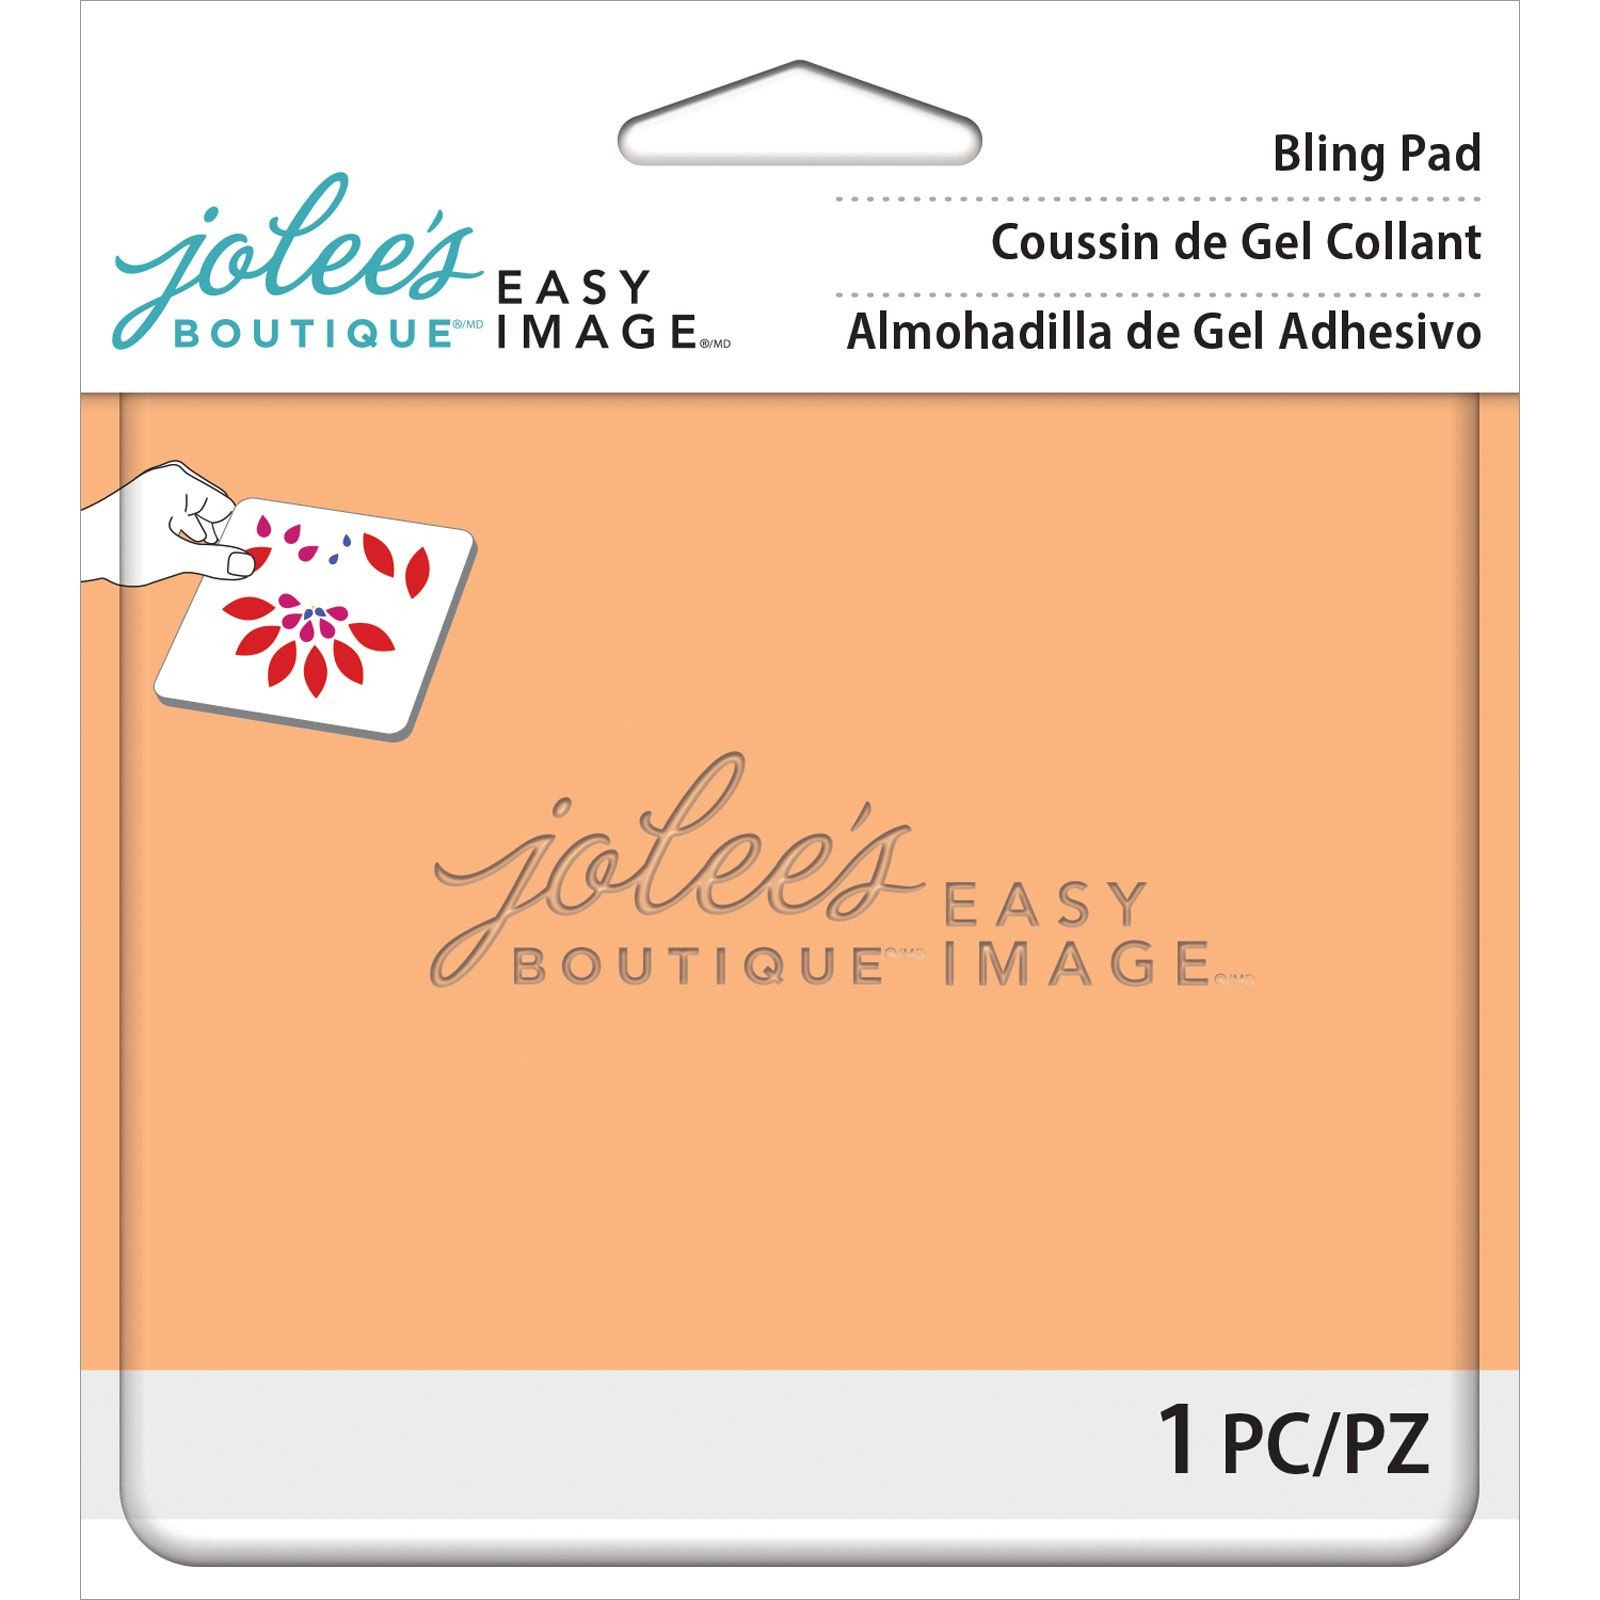 Jolee's boutique • Easy image bling pad